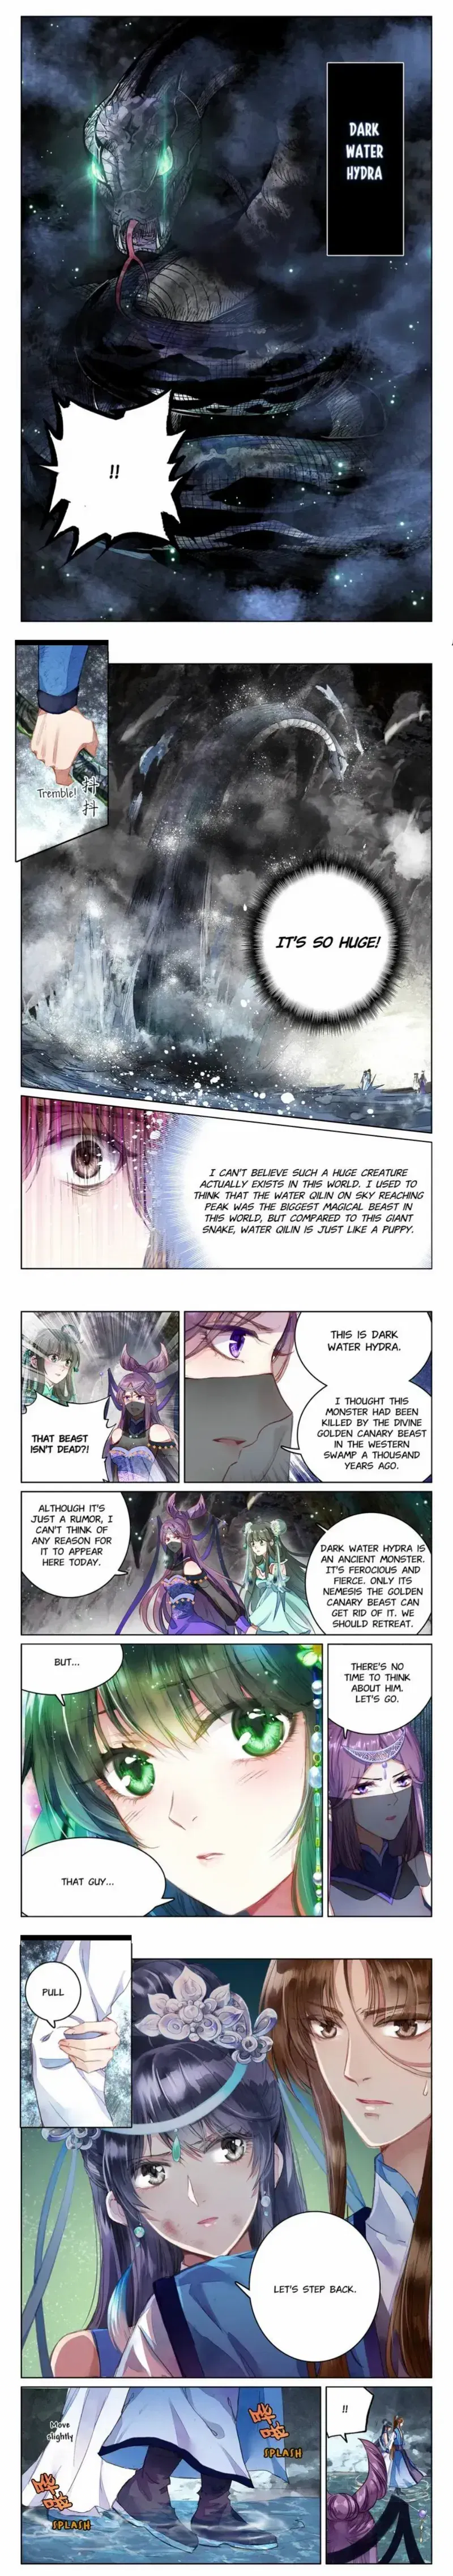 Celestial Destroyer Chapter 16.1 page 4